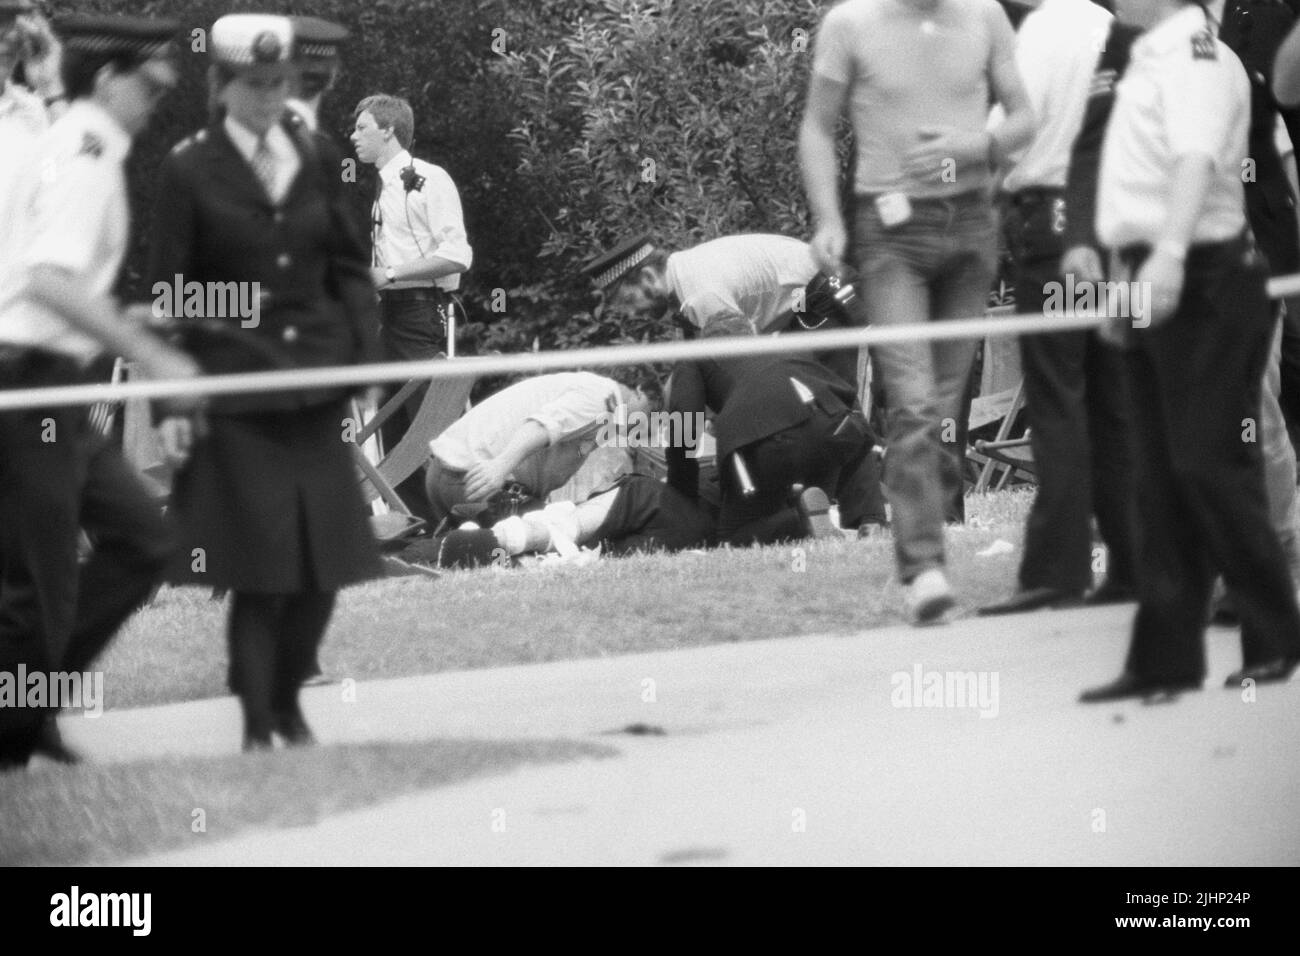 File photo dated 20/7/1982 of members of the emergency services tending to a casualty at the Regent's Park bandstand. The families of soldiers killed in the Hyde Park and Regent's Park IRA bombings have told how their suffering remains undiminished 40 years on. In total 11 military personnel died in the two attacks which occurred within hours of each other in London on July 20 1982. Issue date: Wednesday July 20, 2022. Stock Photo